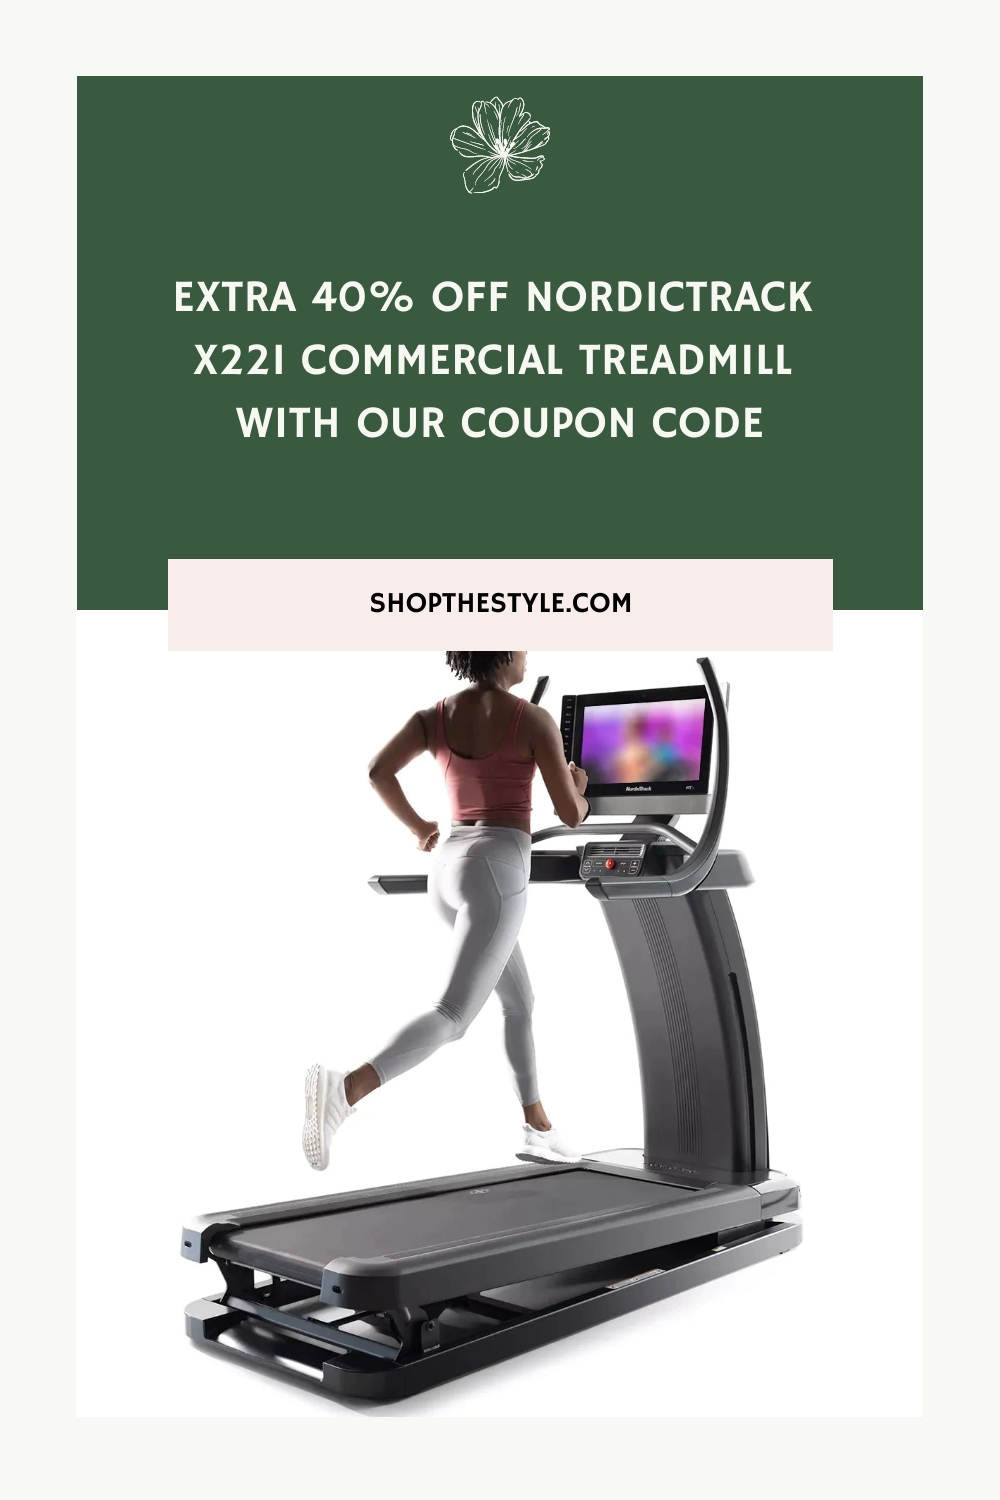 NordicTrack X22i Commercial Treadmill only $1800 w/Free Shipping!